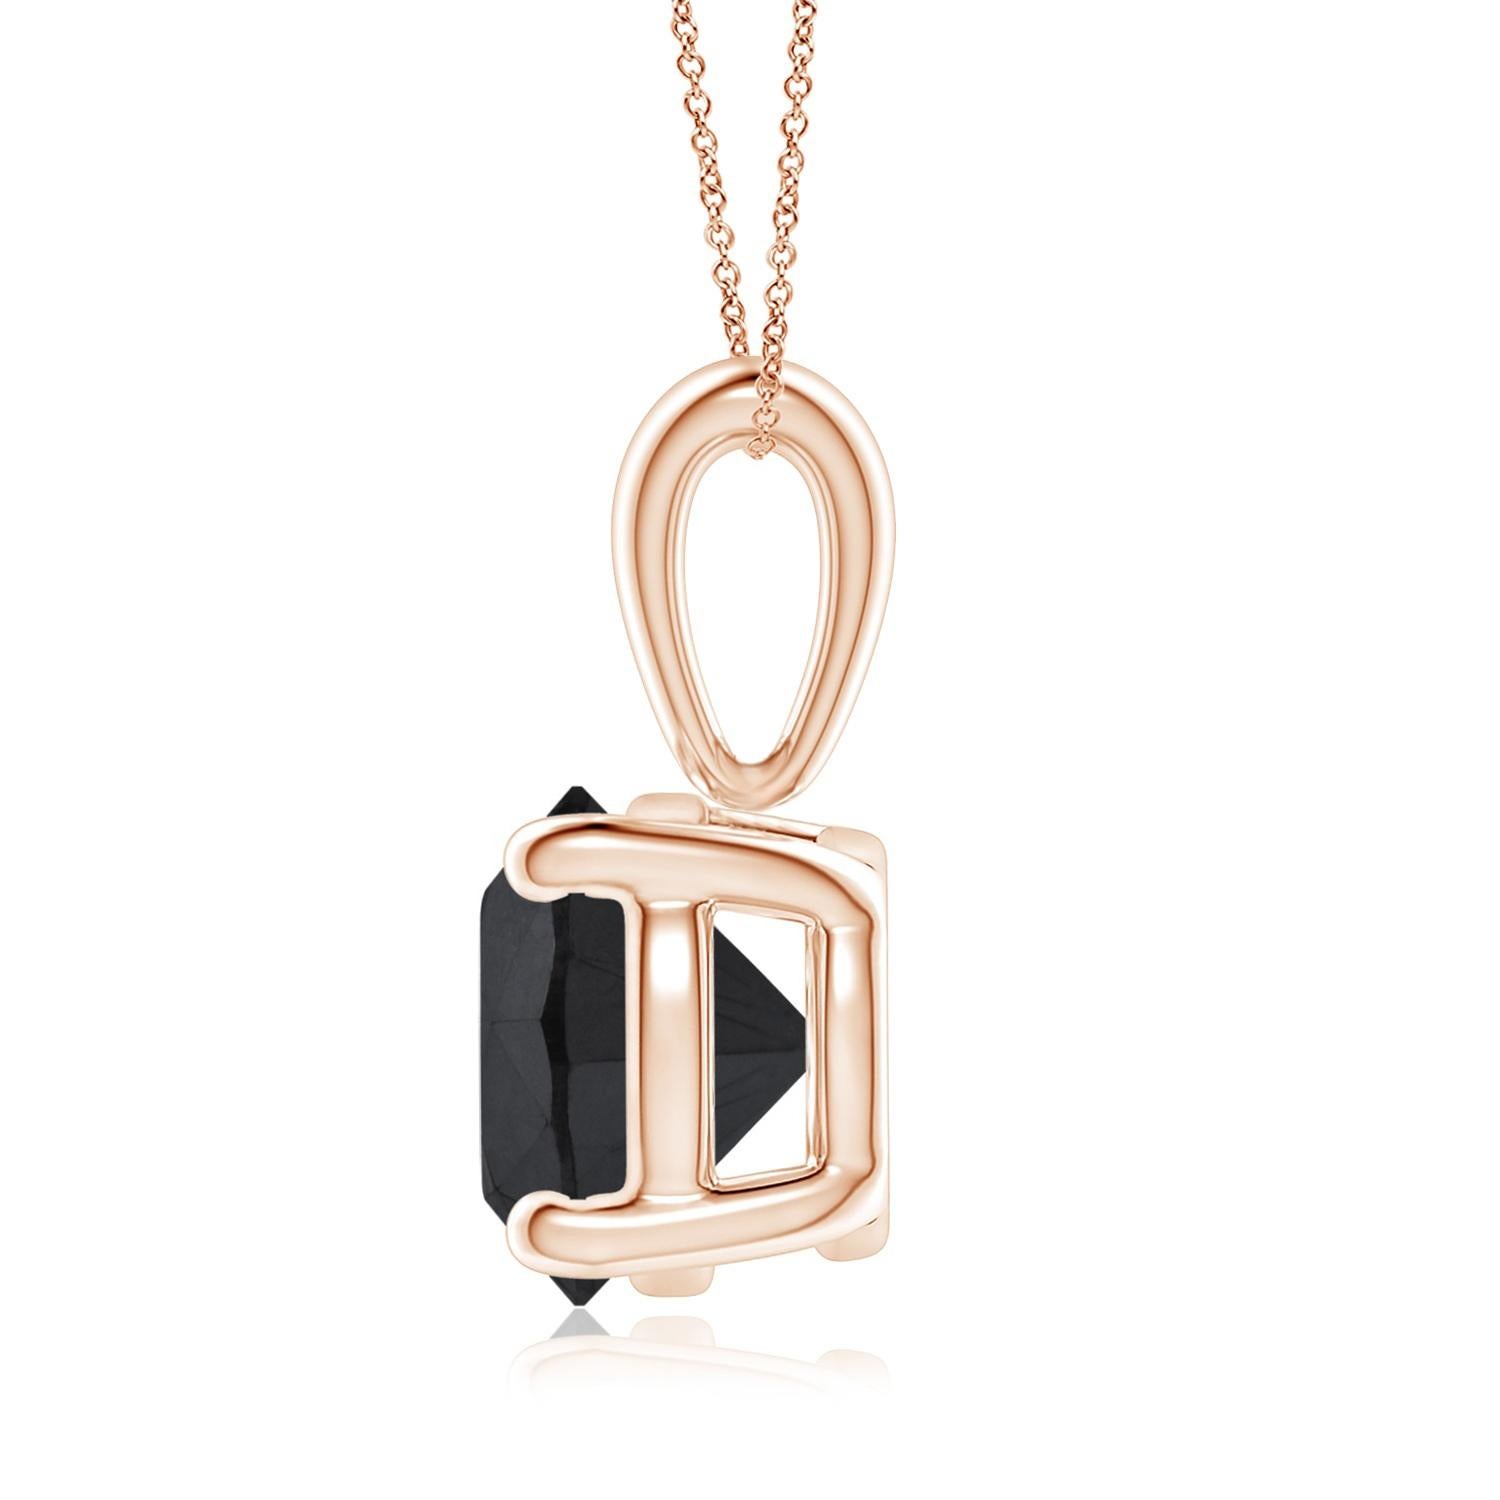 Surprise a special woman in your life with this breathtaking, statement hand crafted solitaire black diamond necklace. This eye-catching pendant necklace features a 3.15 carat round cut black diamond, measuring 8.51 x 8.55 x 6.70 mm set in 14k rose